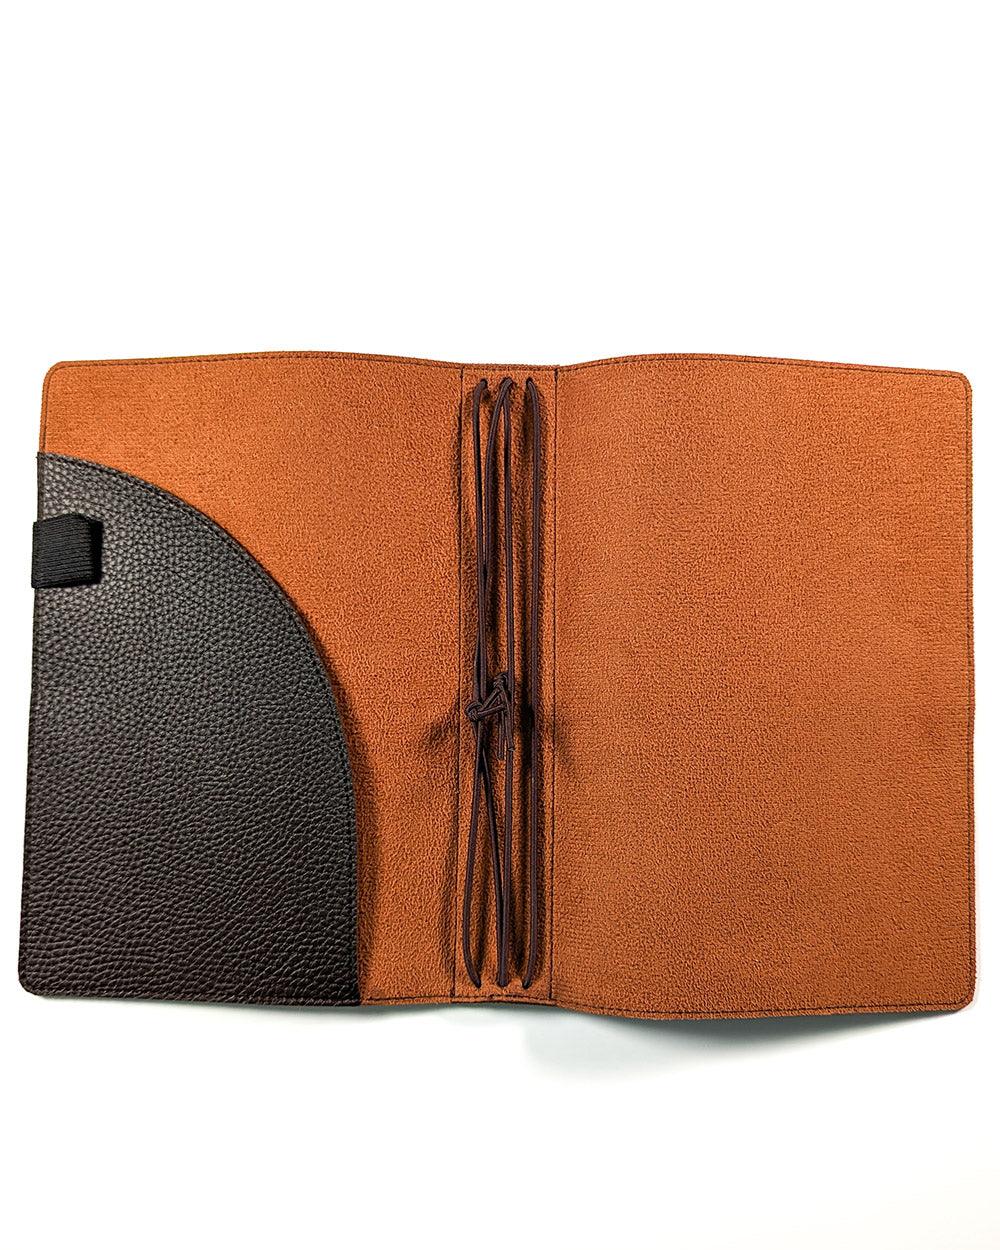 Vegan leather juornal notebook cover for use with your saddle stitch notebooks by Jane's Agenda.